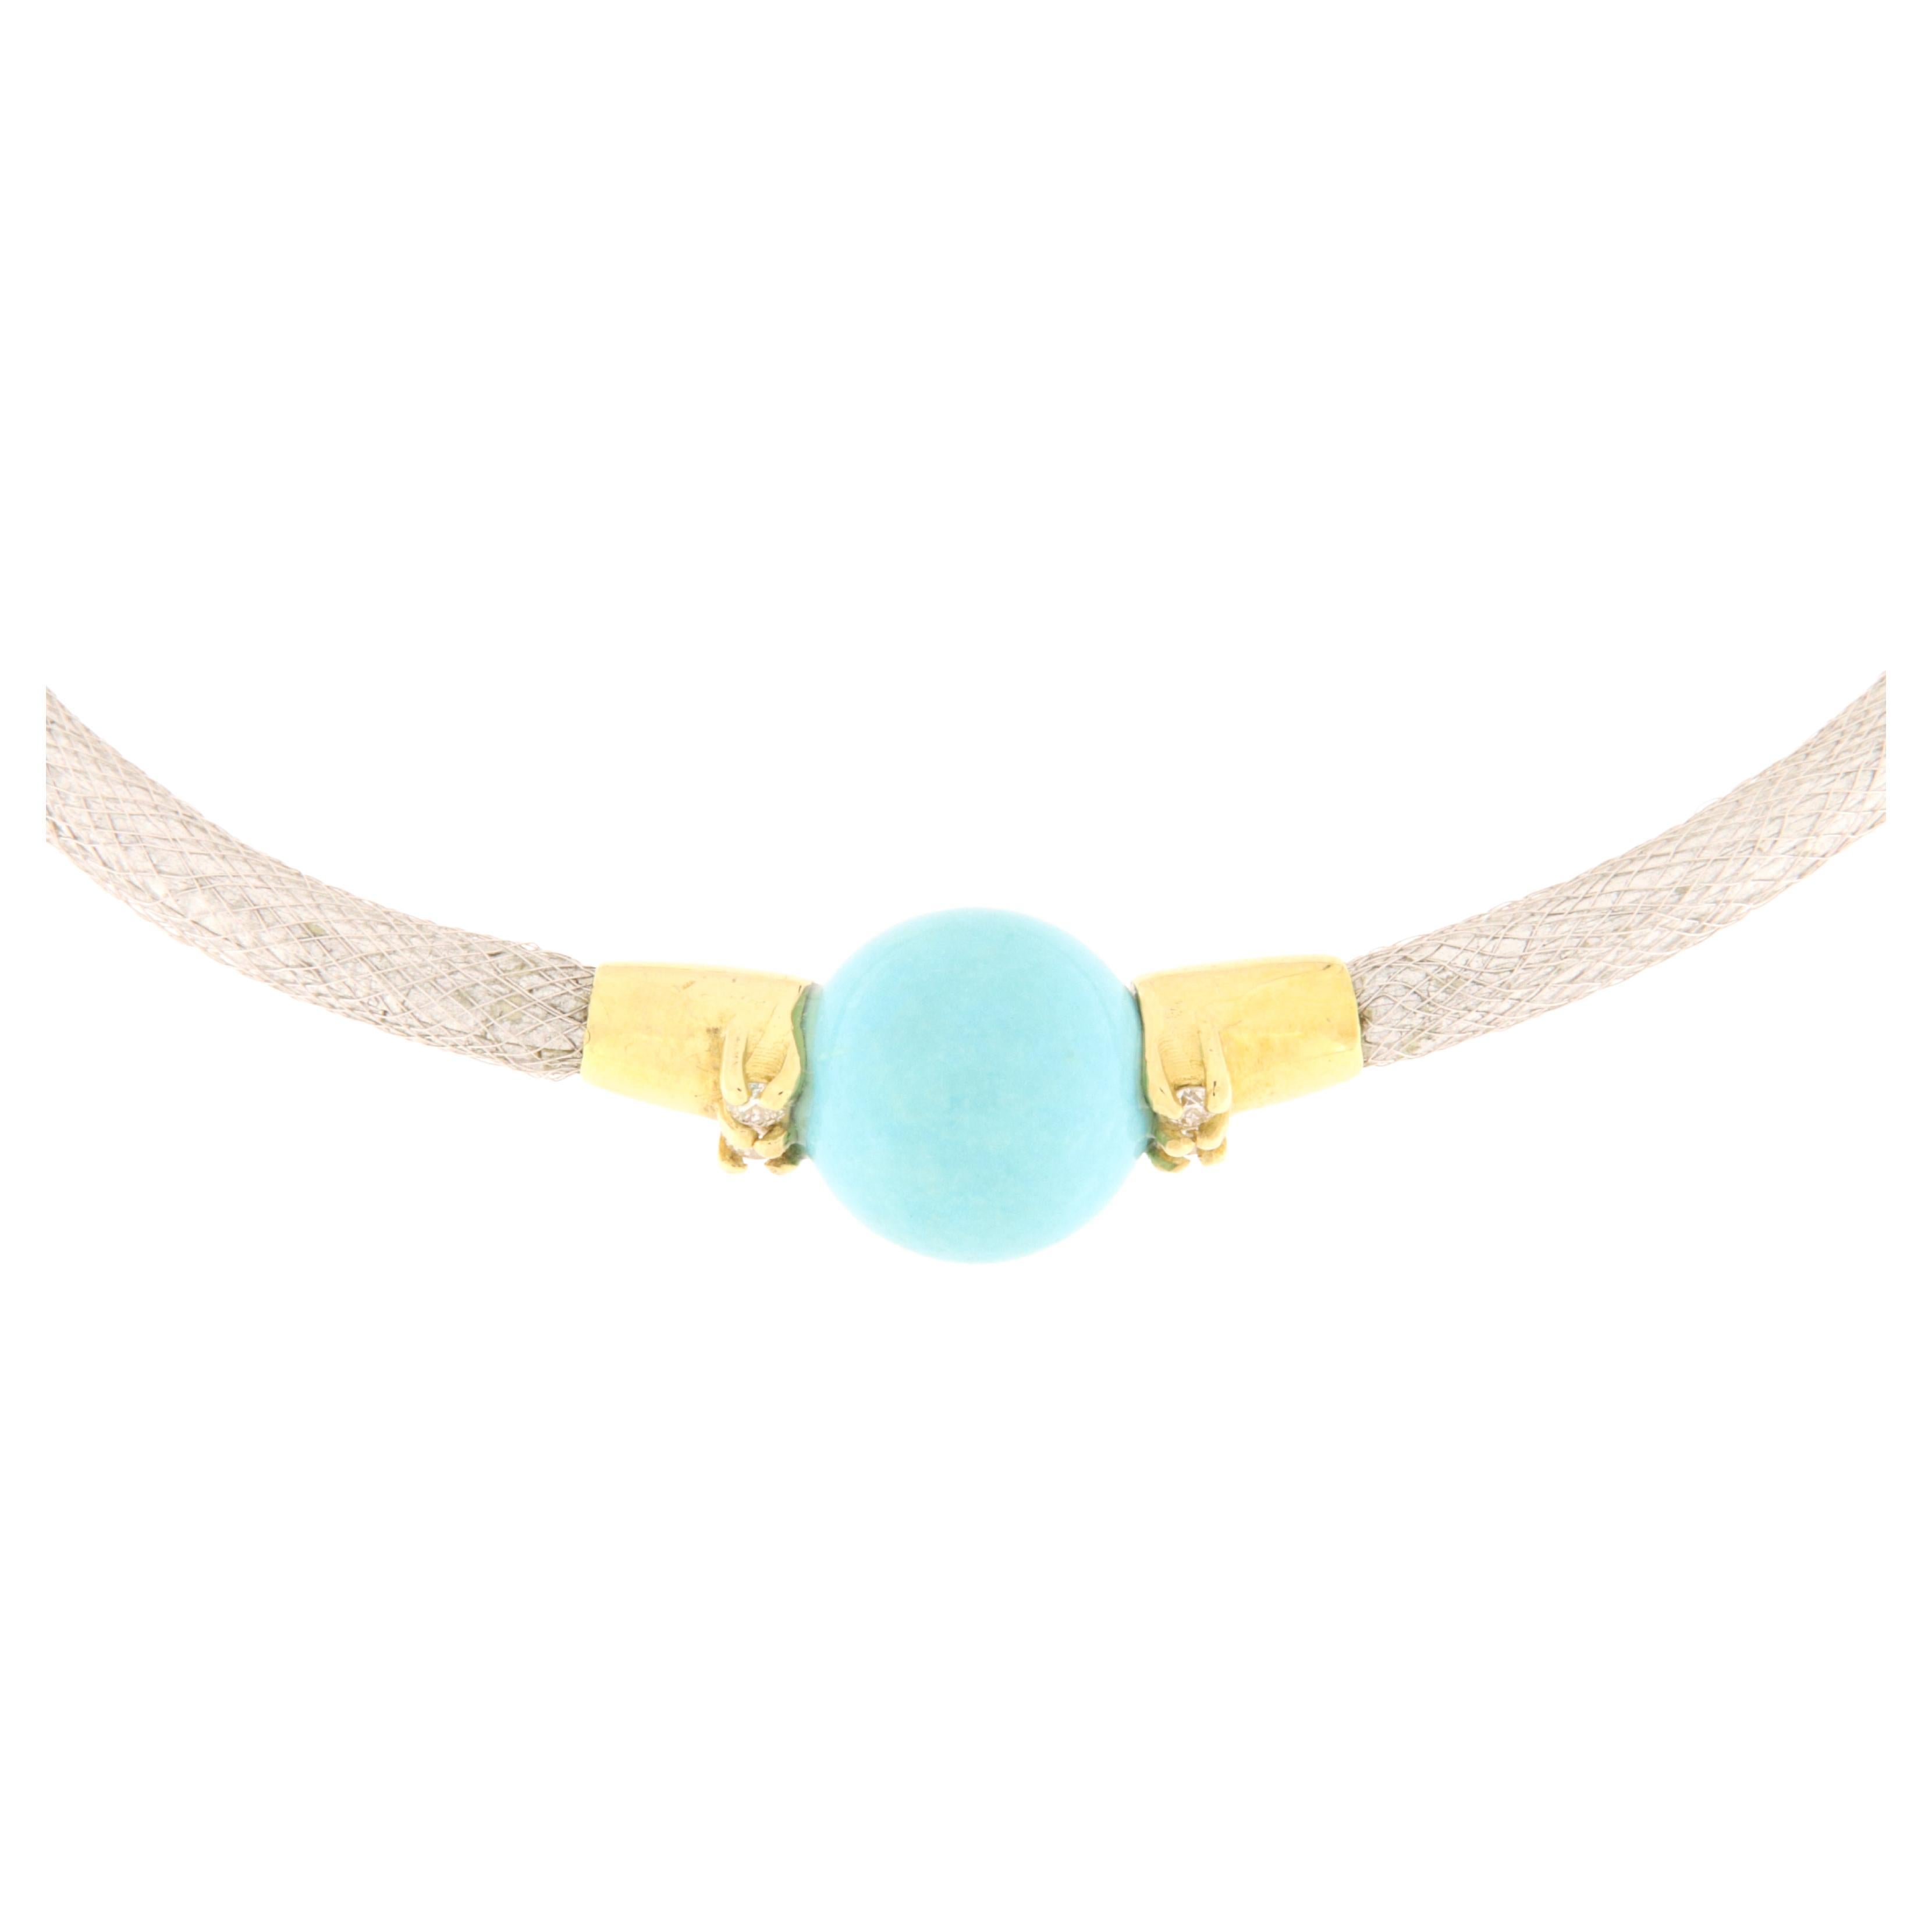 Handmade bracelet with white gold stocking link, yellow gold frame and clasp. Mounted in the center is a turquoise ball with four side rhinestones. The model is also available with a central gray pearl and in yellow gold with gold pearl.